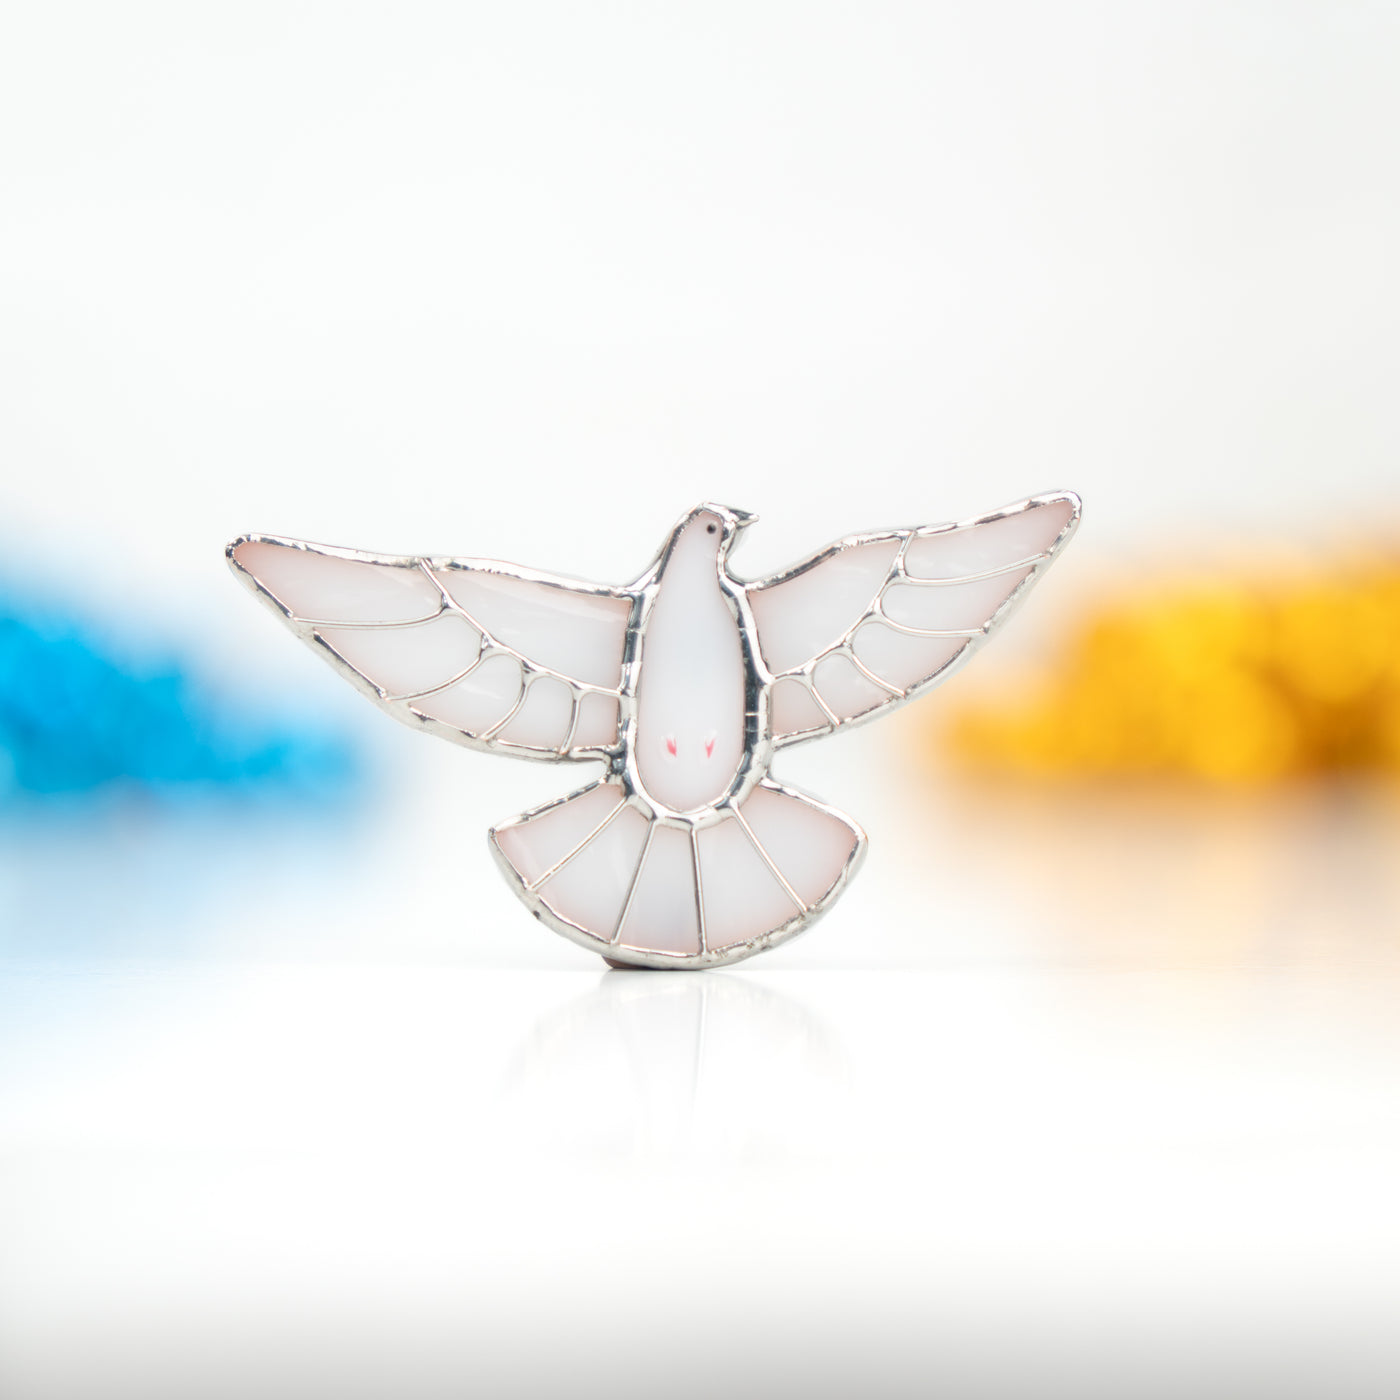 Stained glass flying dove pin